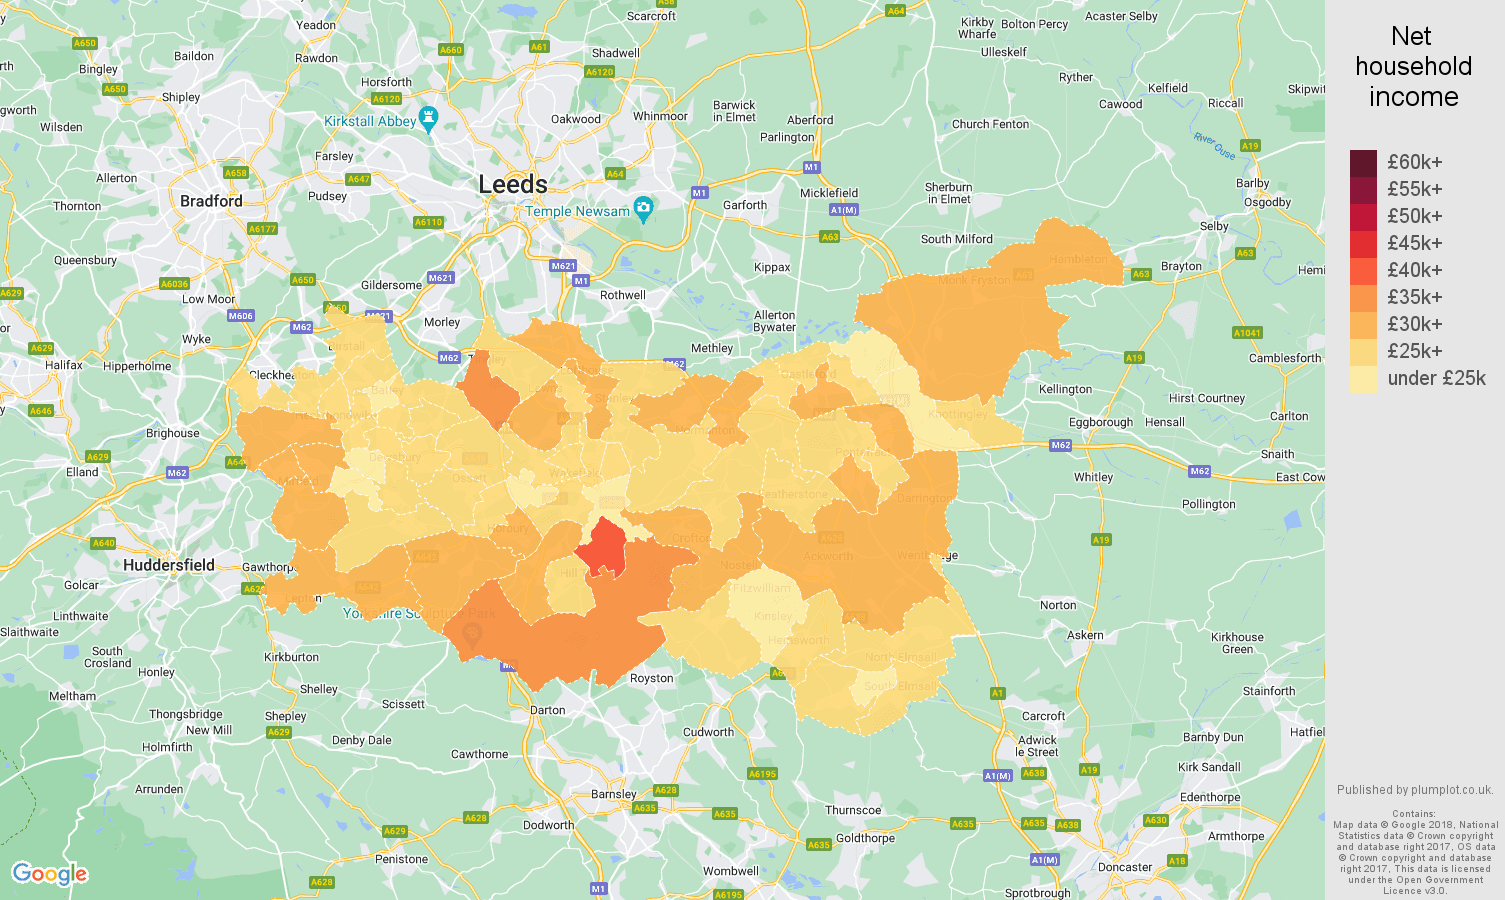 Wakefield net household income map